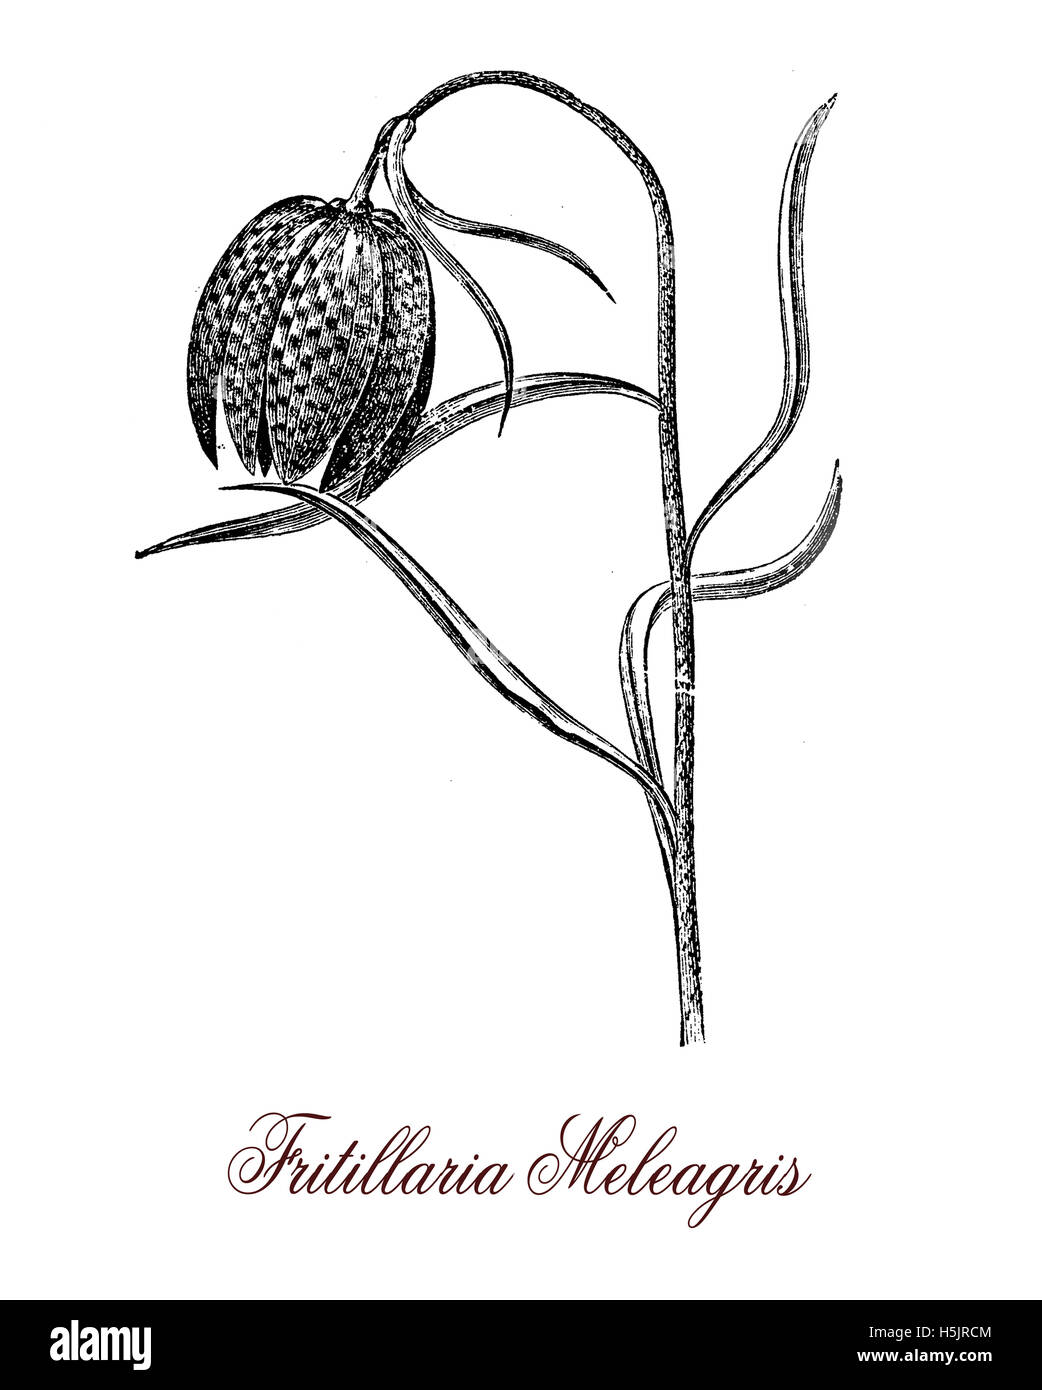 Fritillaria meleagris or chequered lily is a flowering plant with a chequered pattern on the flowers usually purple, the bulb contains poisonous alkaloids Stock Photo